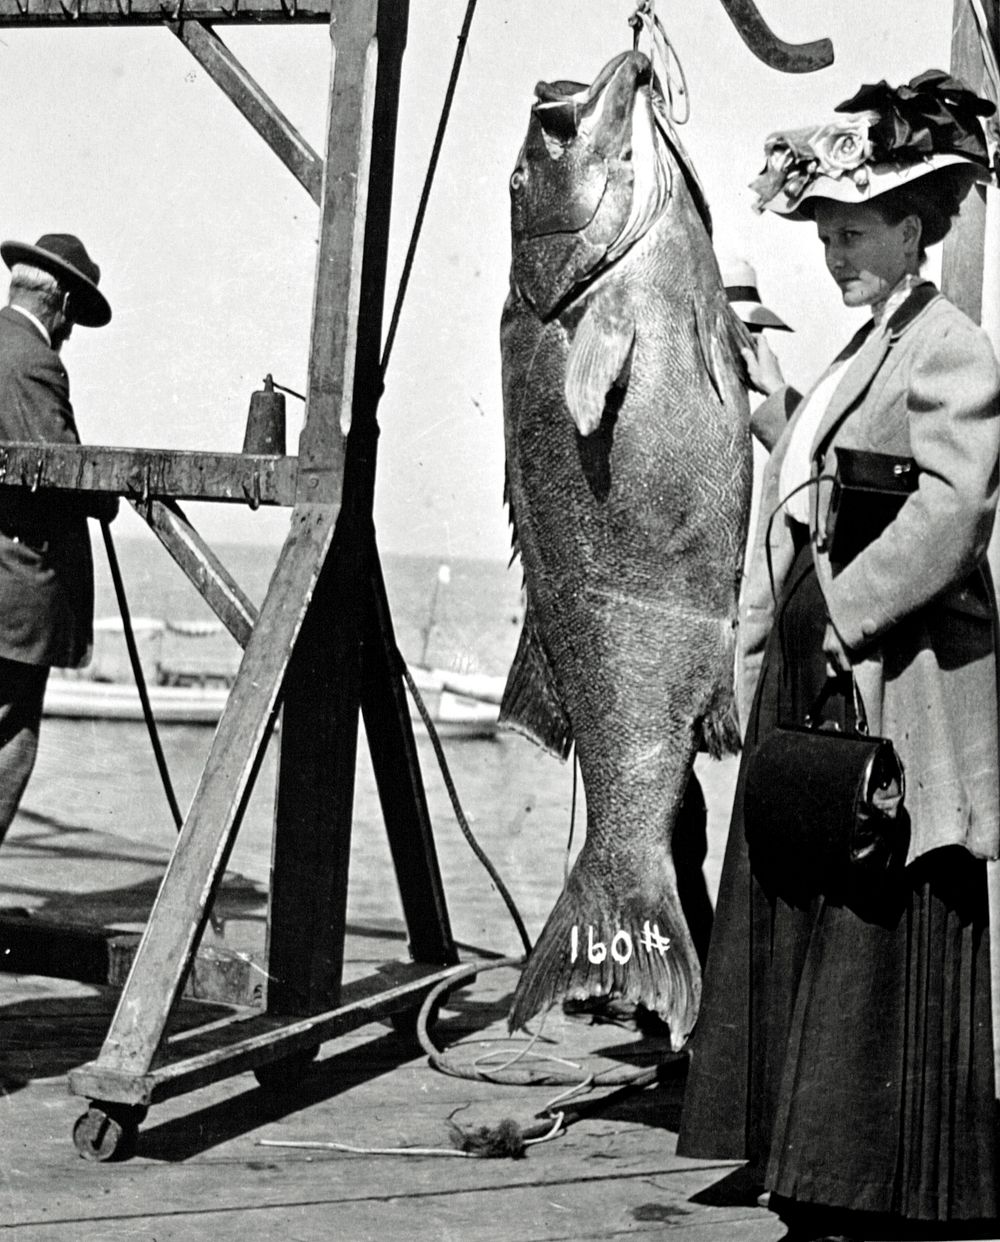 A lady was standing by a very big fish, Newport, OR c1912Siuslaw National Forest Historic Photo. Original public domain…